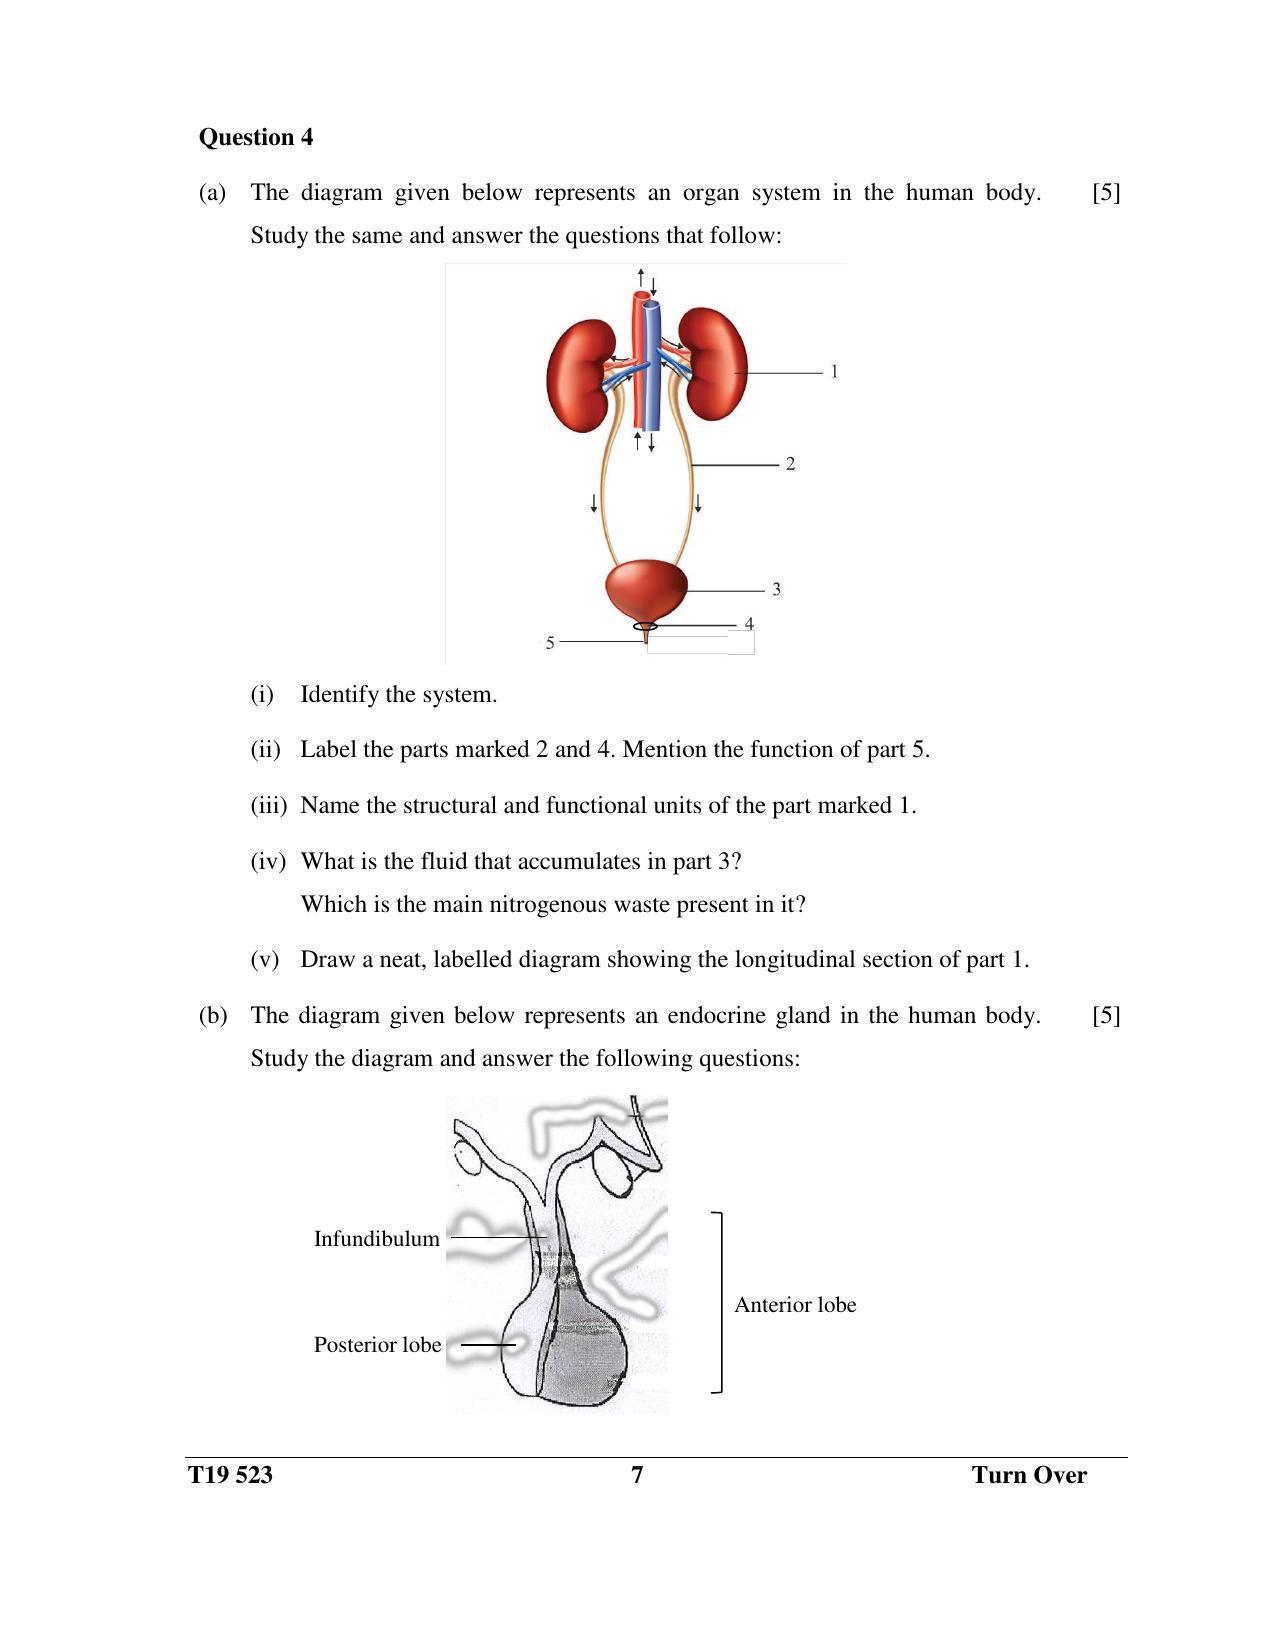 ICSE Class 10 Science Paper 3 (Biology) 2019 Question Paper - Page 7